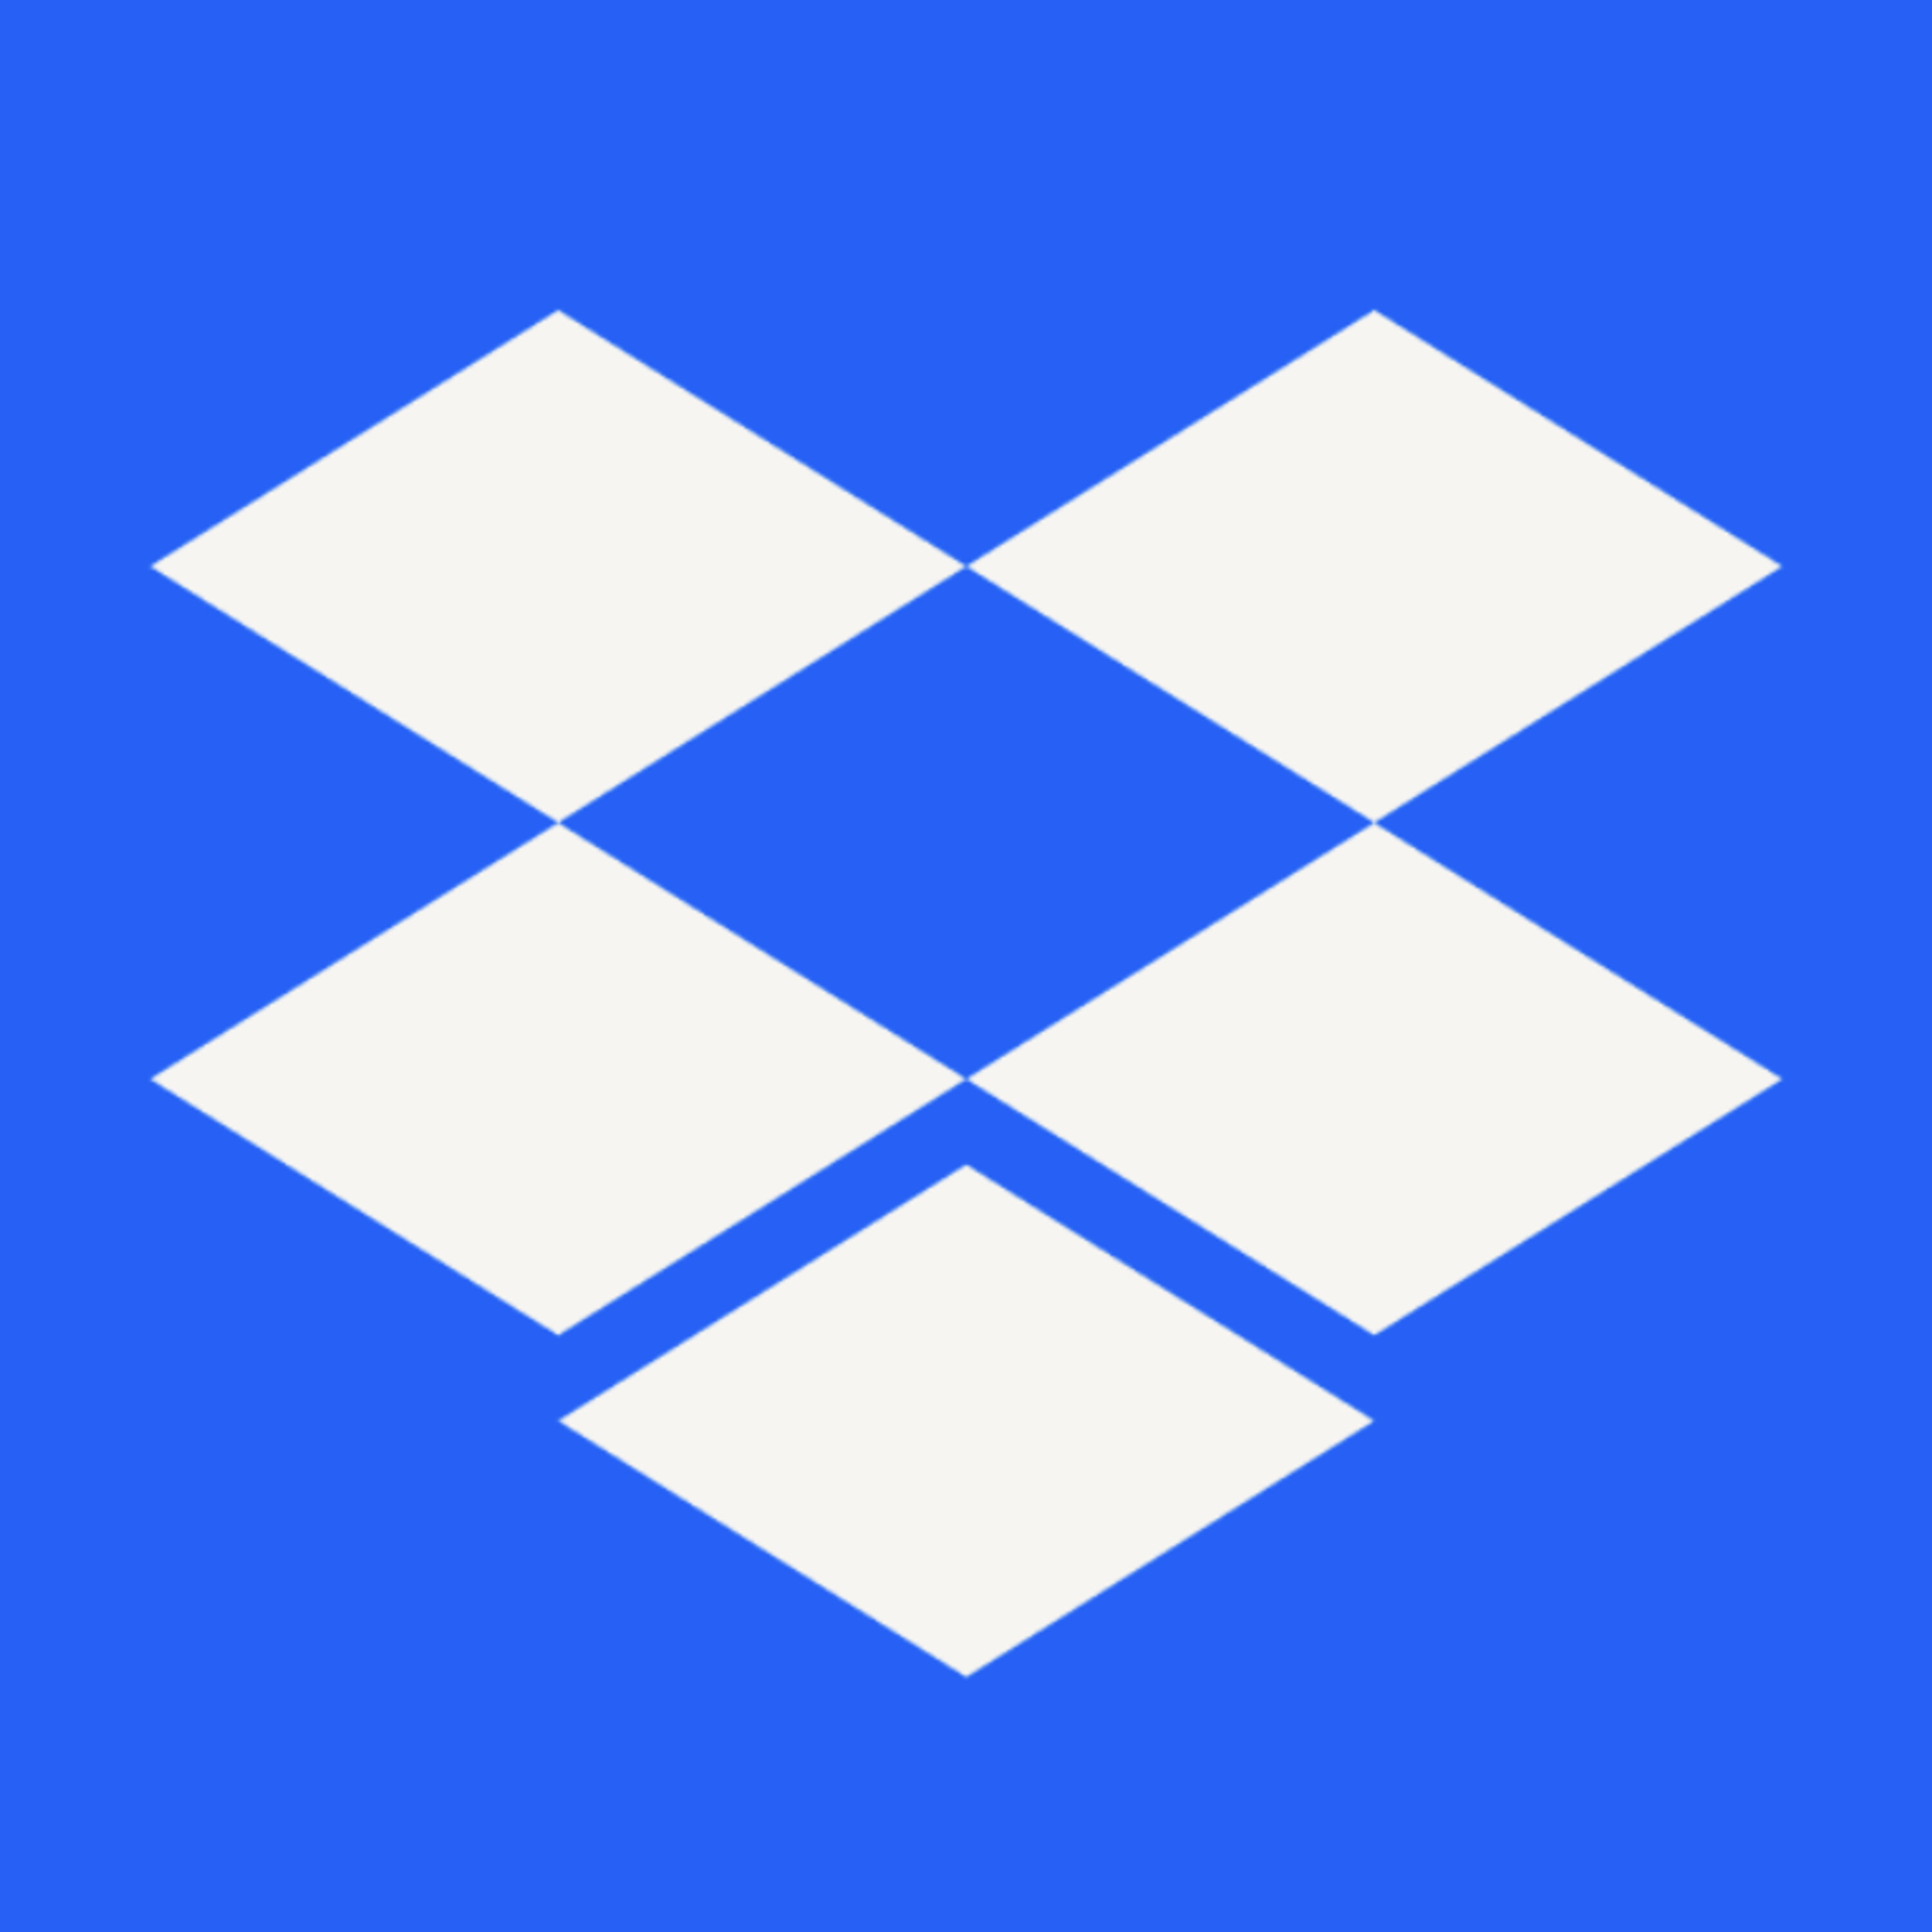 Dropbox: What's going on up there? (PREVIEW)